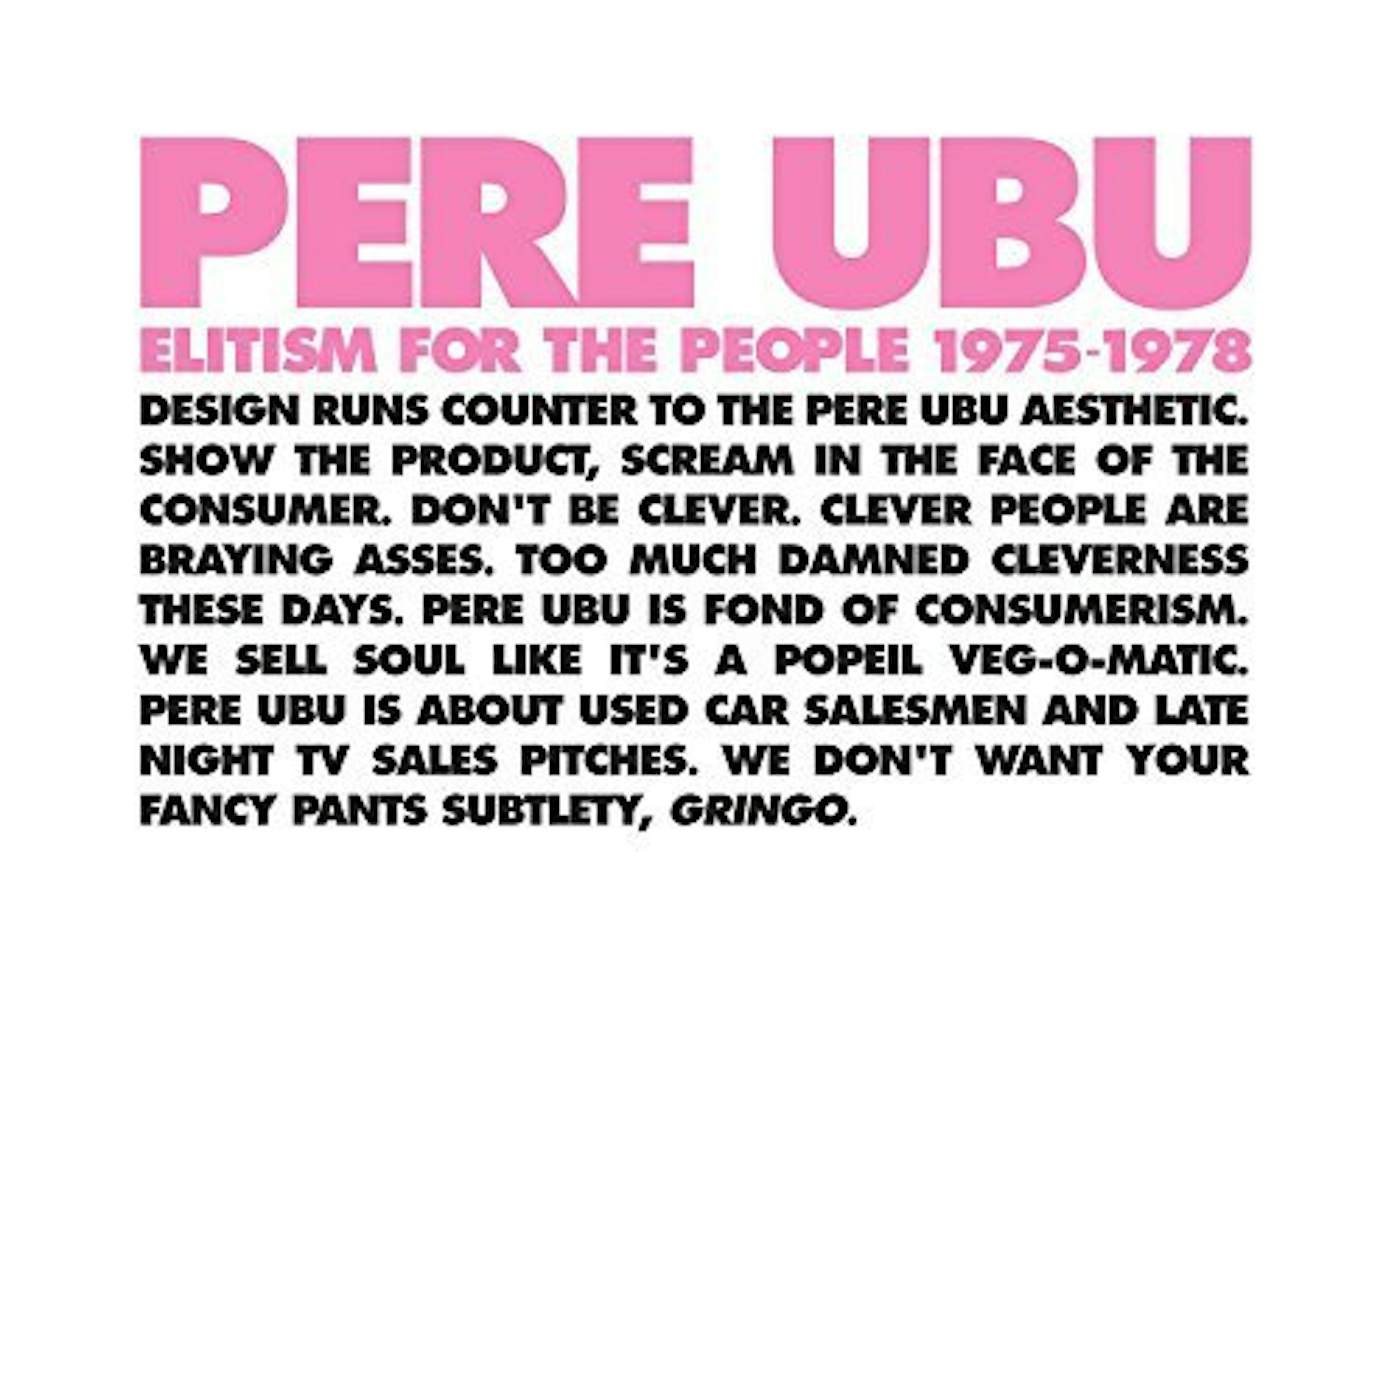 Pere Ubu ELITISM FOR THE PEOPLE 1975-1978 Vinyl Record